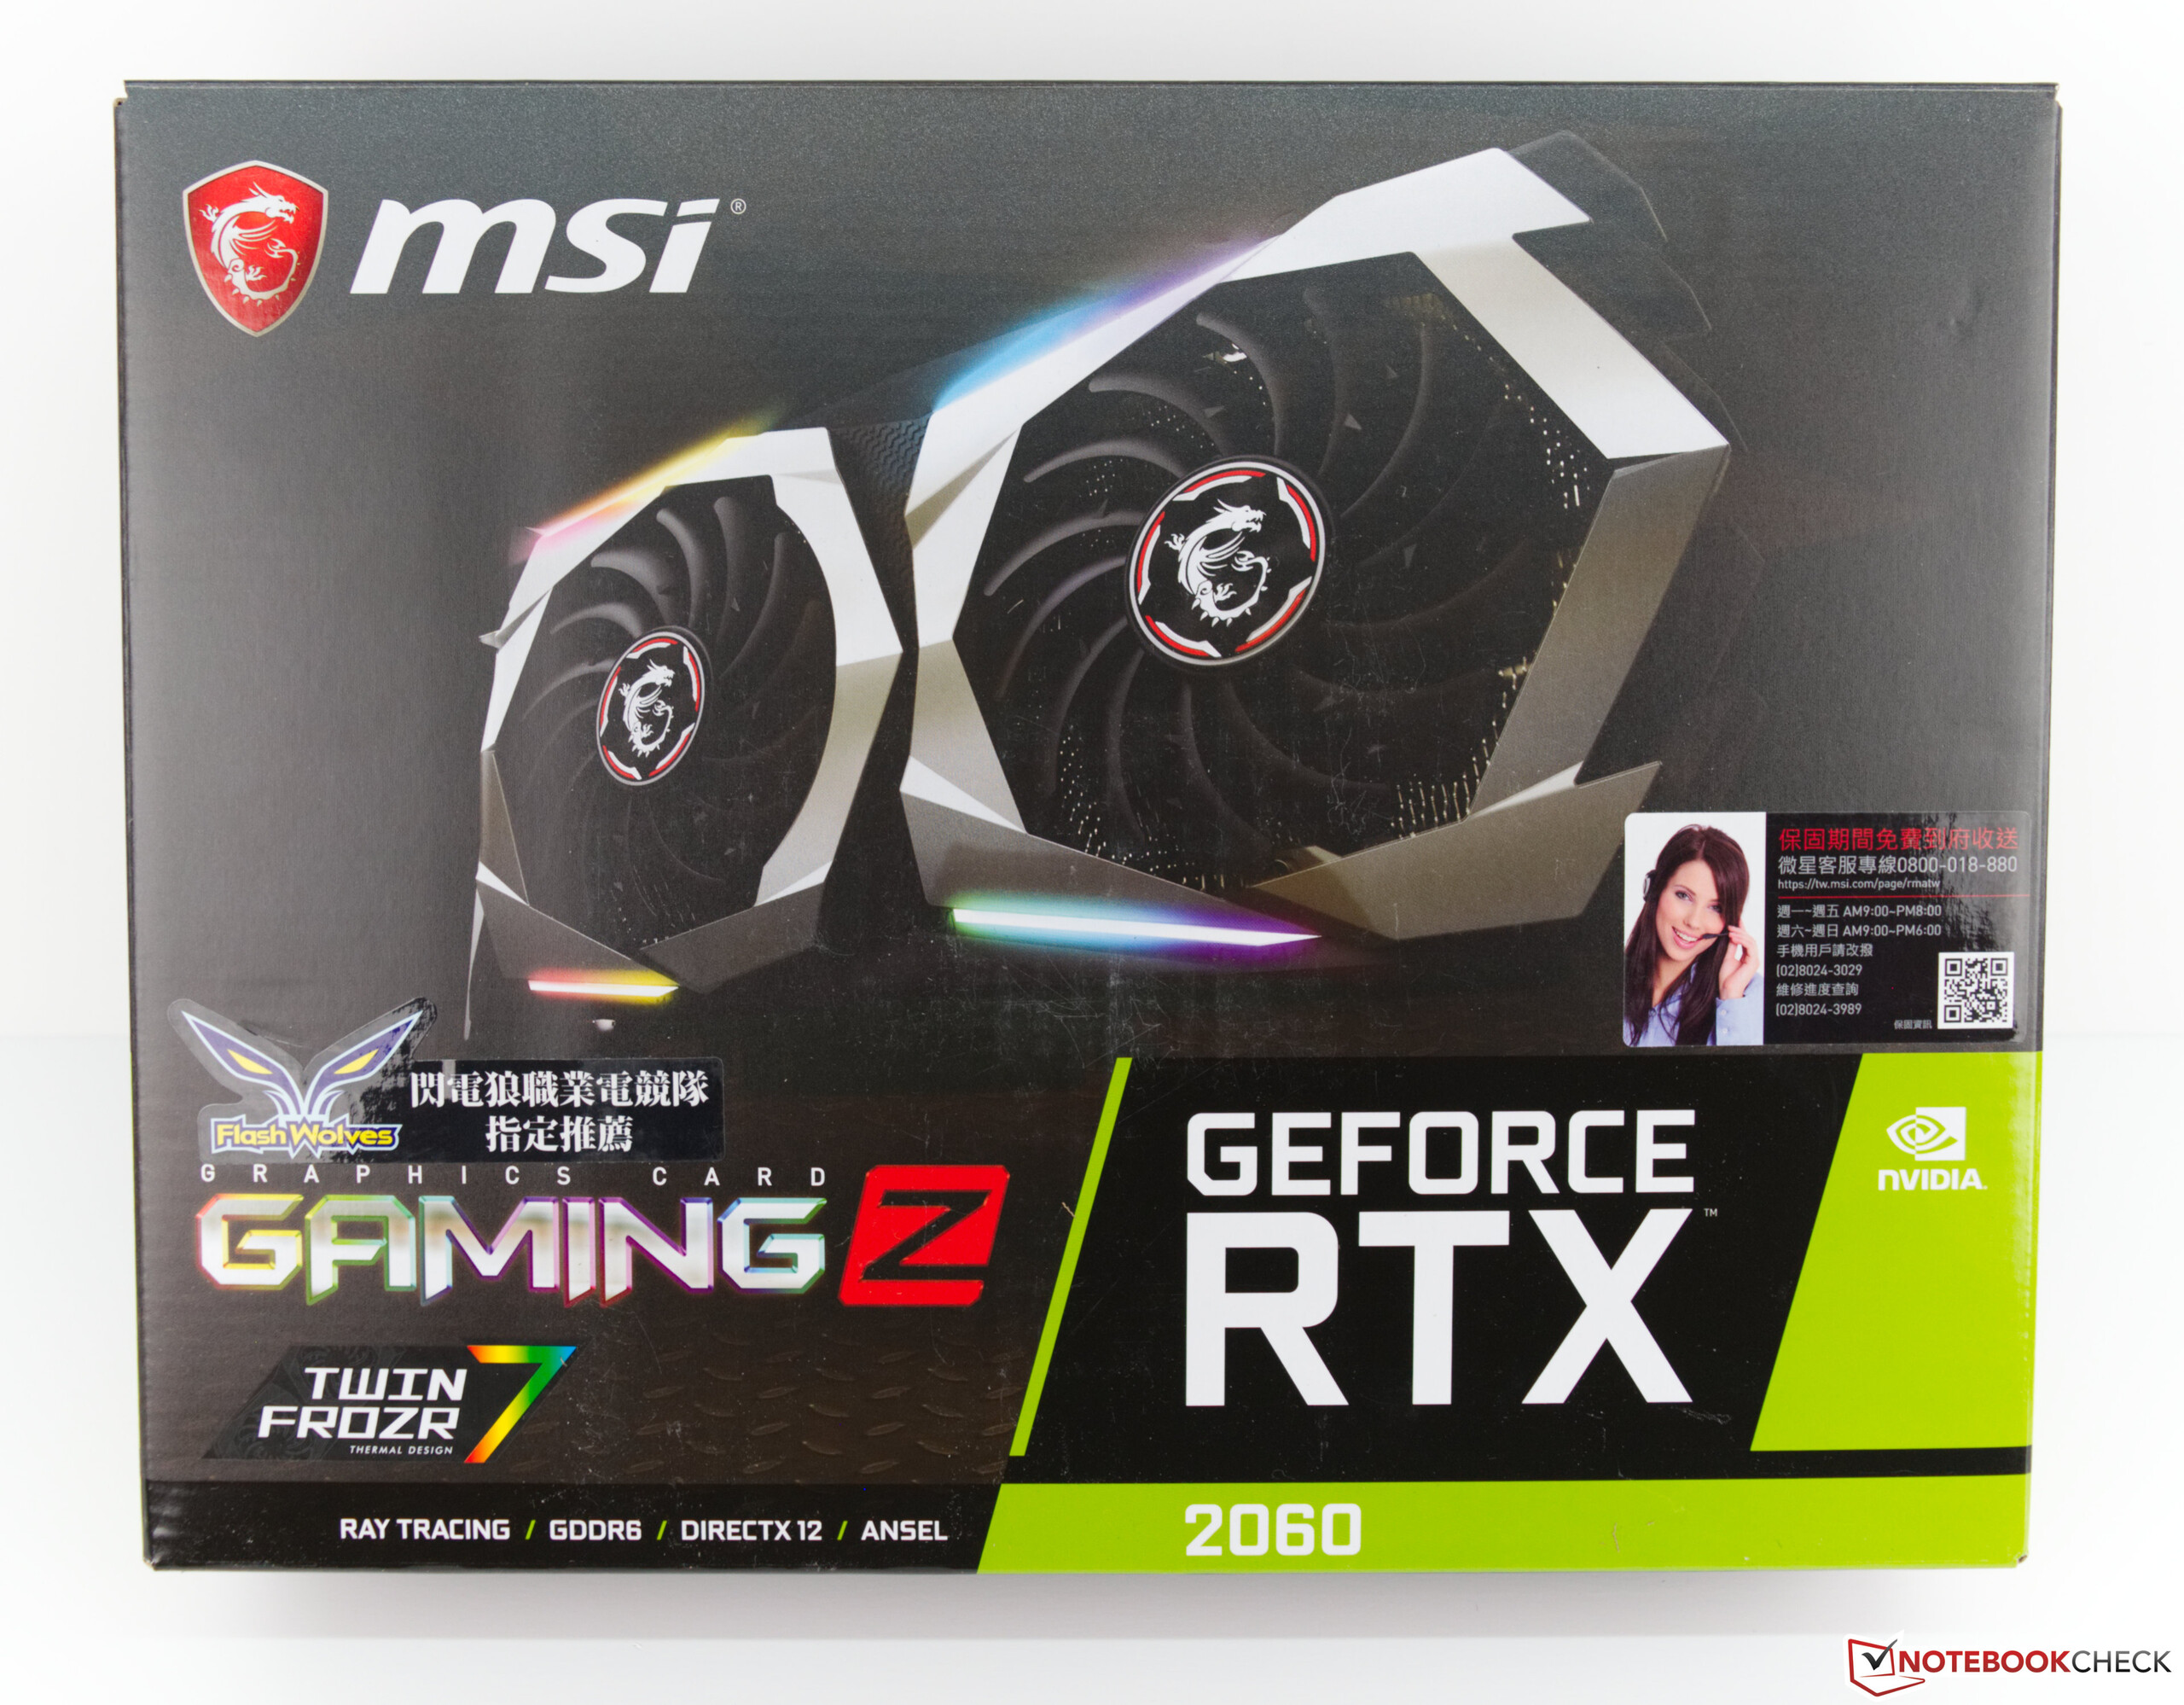 MSI RTX 2060 Gaming Z 6G Desktop Graphics Card Review - NotebookCheck.net  Reviews